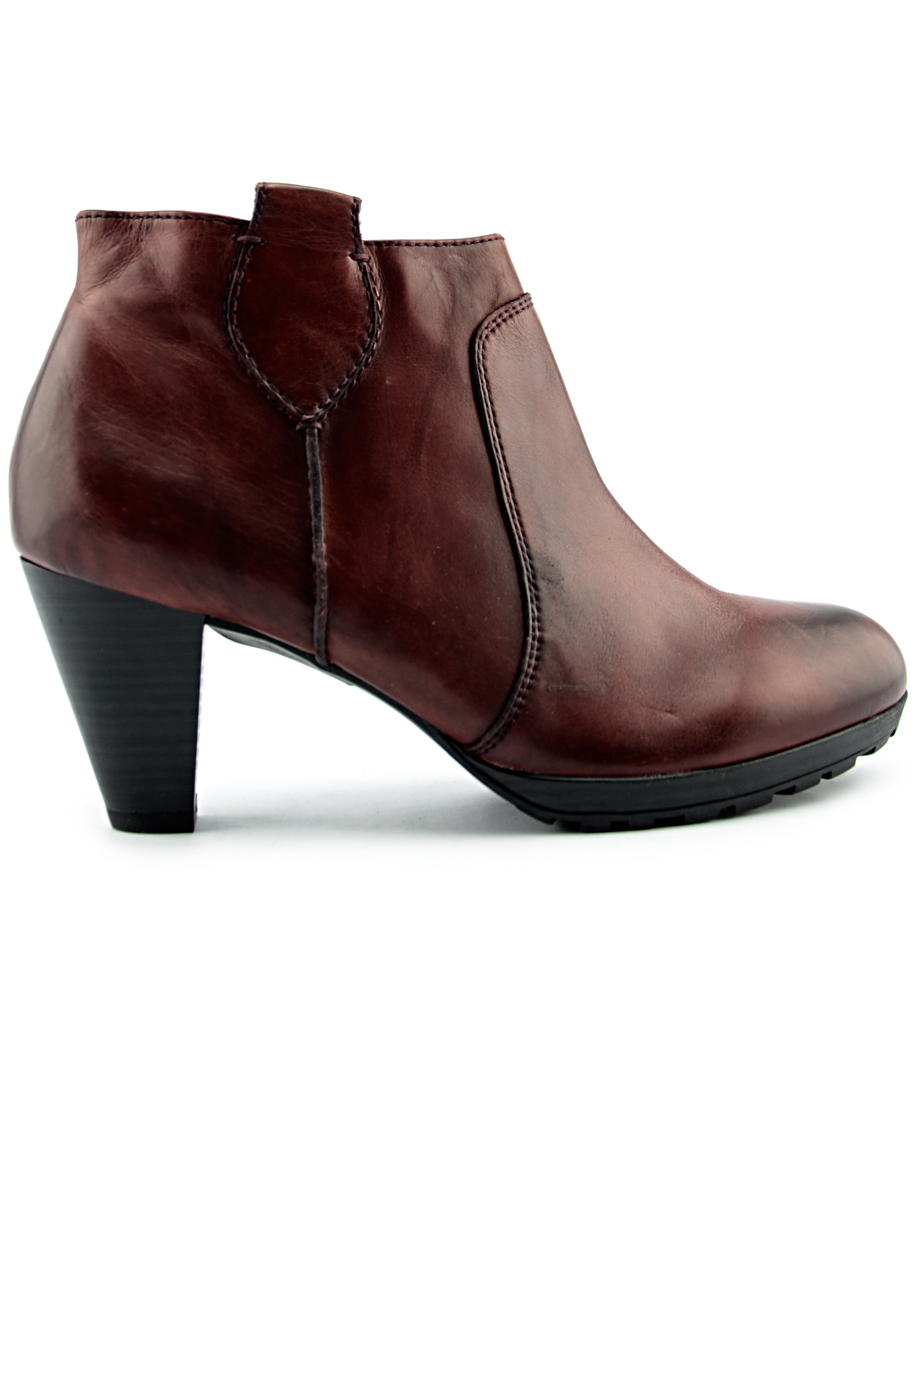 GREEN CROSS Leather Boots/ Oxblood